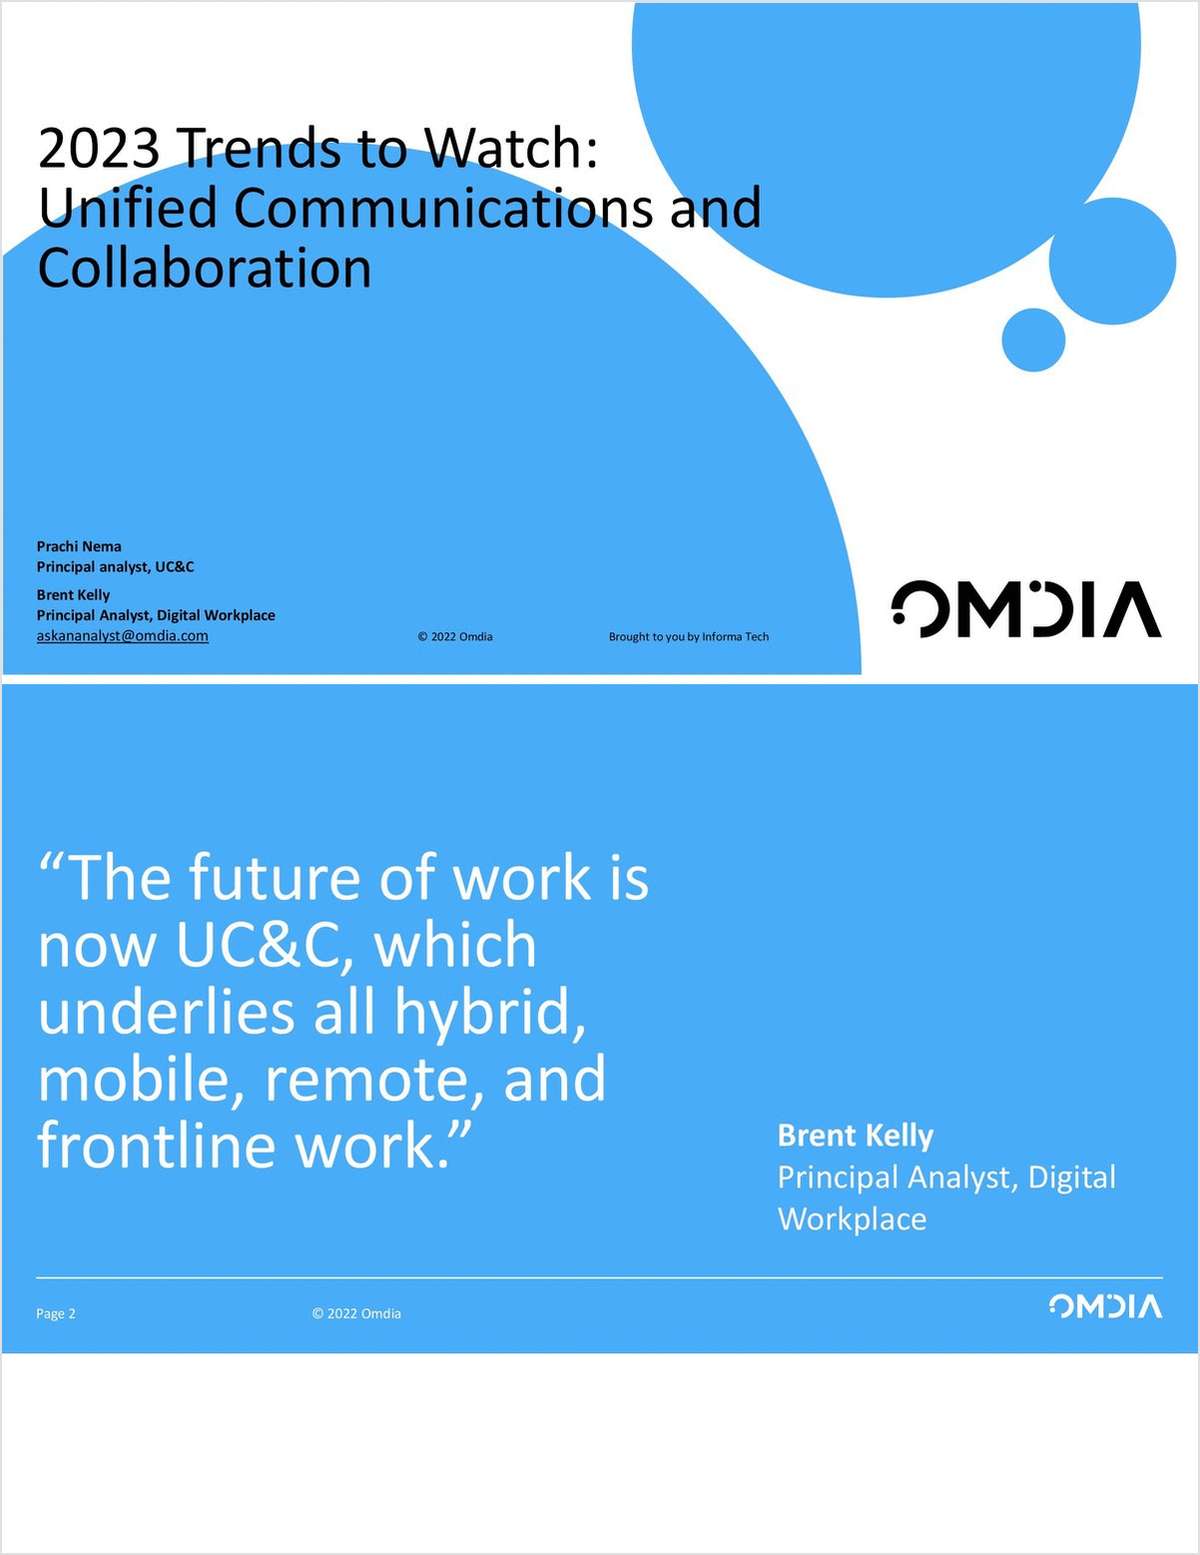 2023 Trends to Watch: Unified Communications and Collaboration